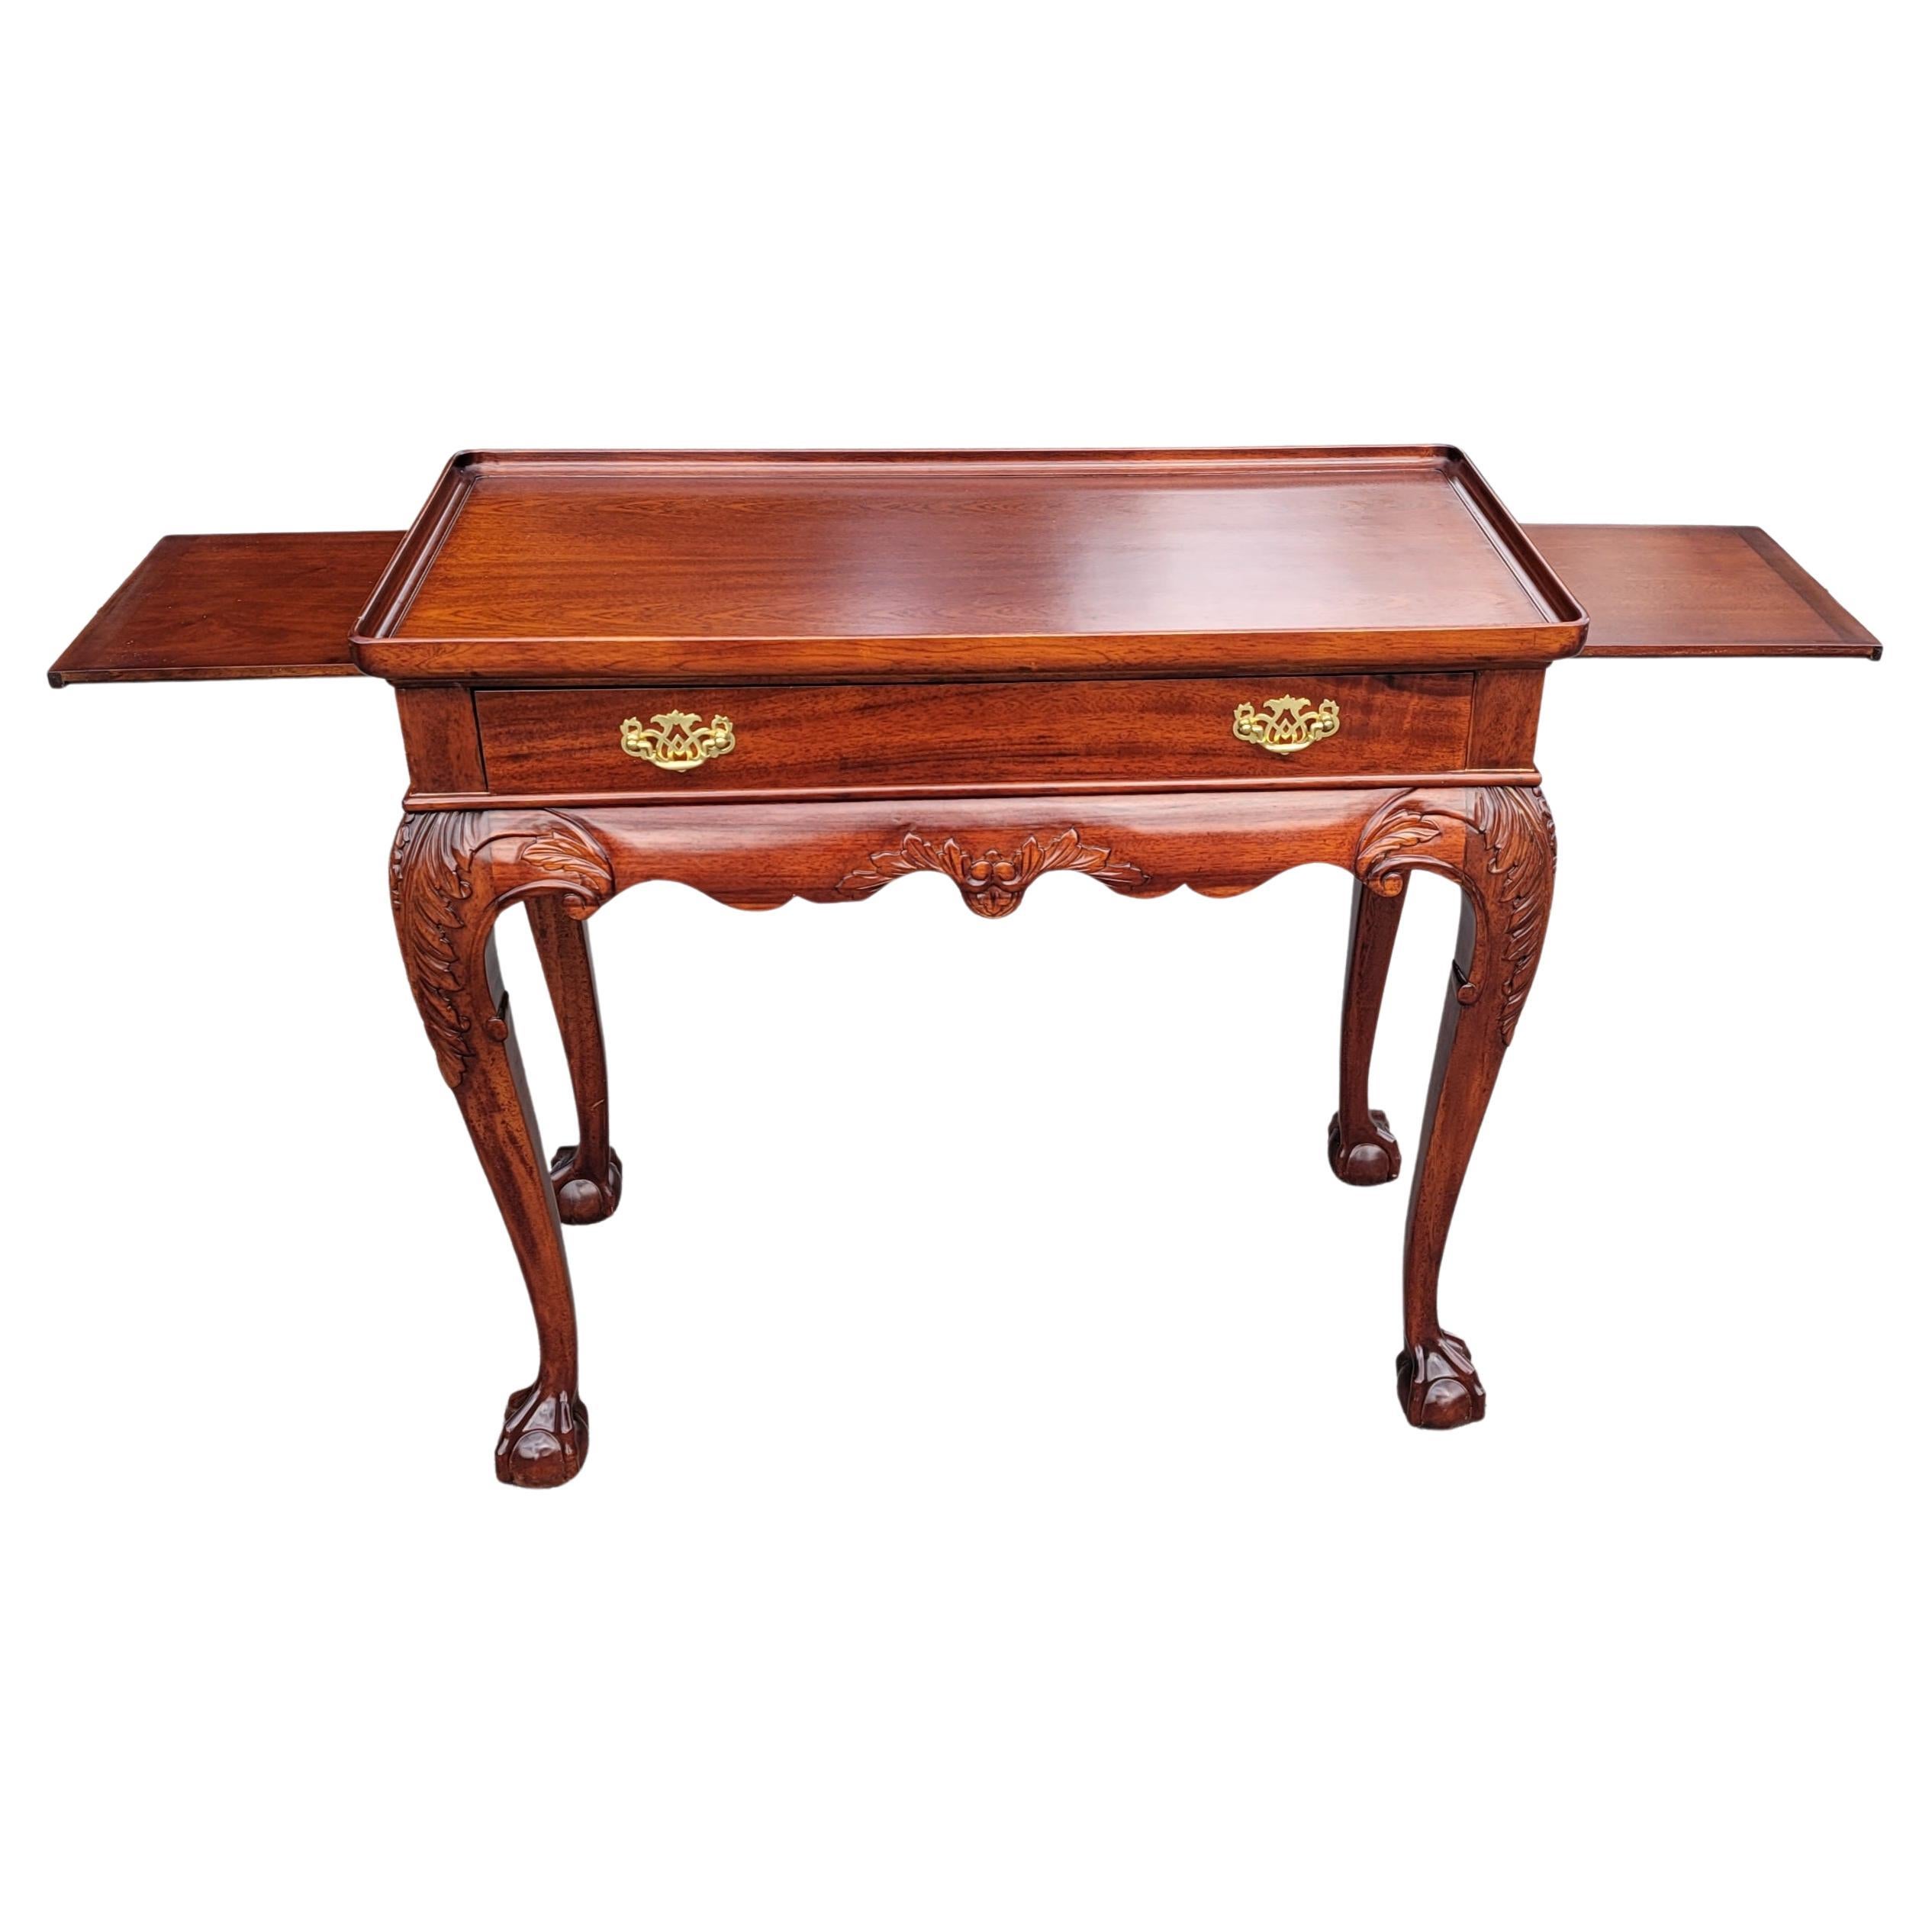 Other Ball & Claw Chippendale Mahogany Server Console  with Gallery and Pull-out Trays For Sale